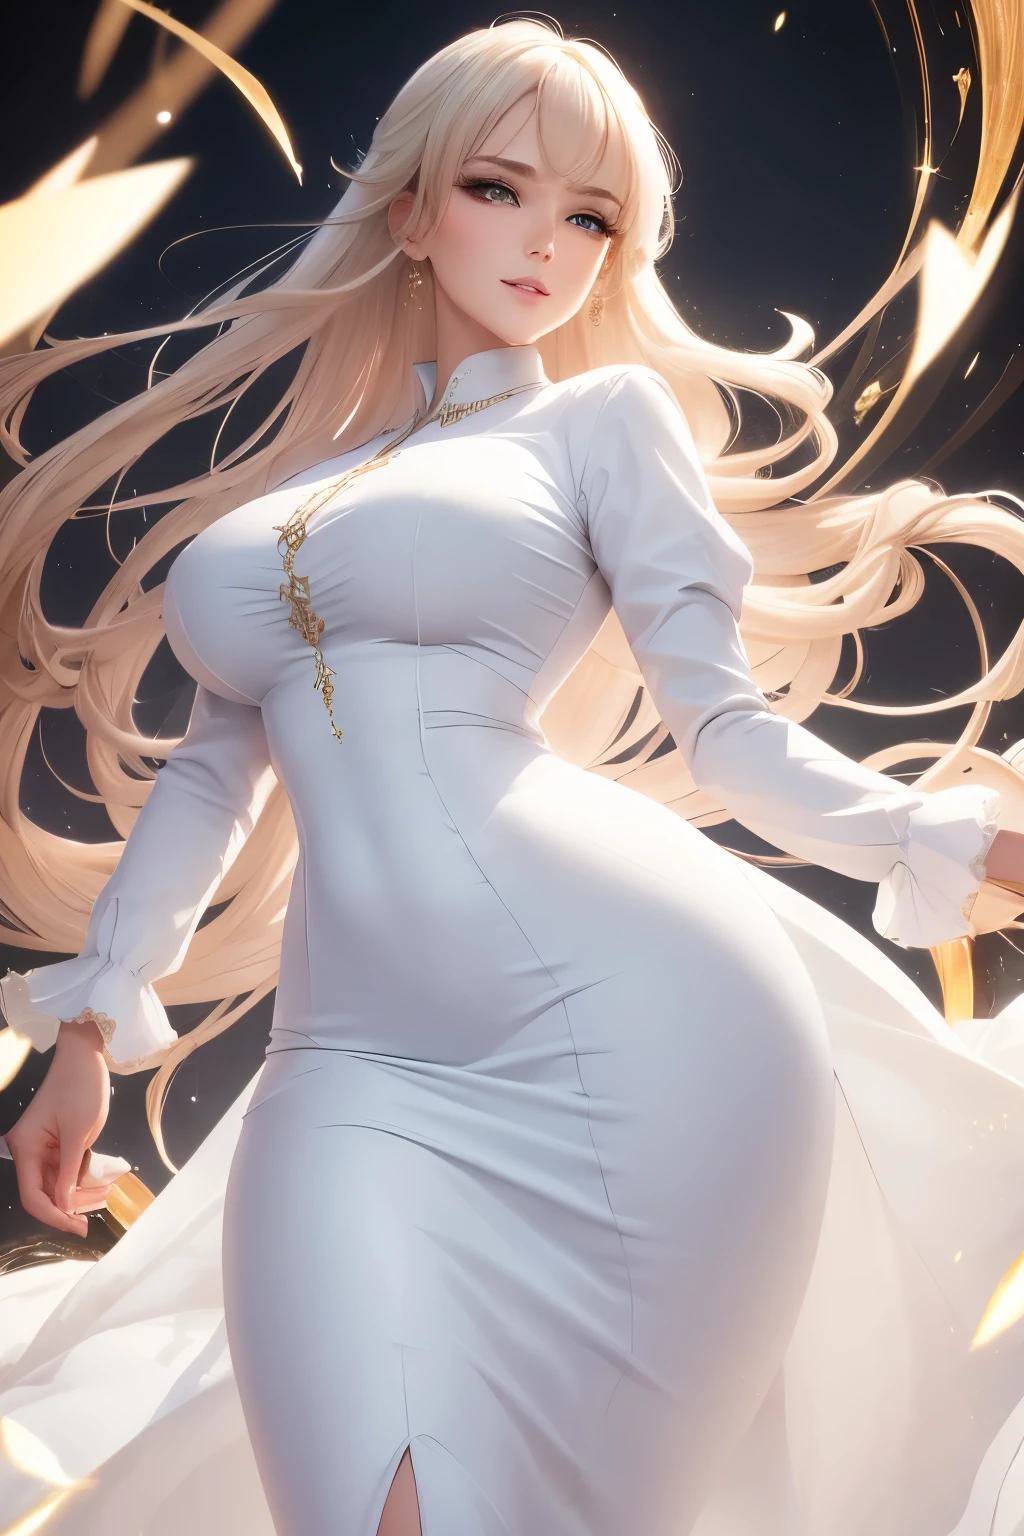 best quality, super fine, 16k, incredibly absurdres, extremely detailed, delicate, flashy and dynamic depiction, beautiful white woman, excited look, superlative body proportion, wearing white long-sleeved and long skirt work clothes, portrait, background simple color